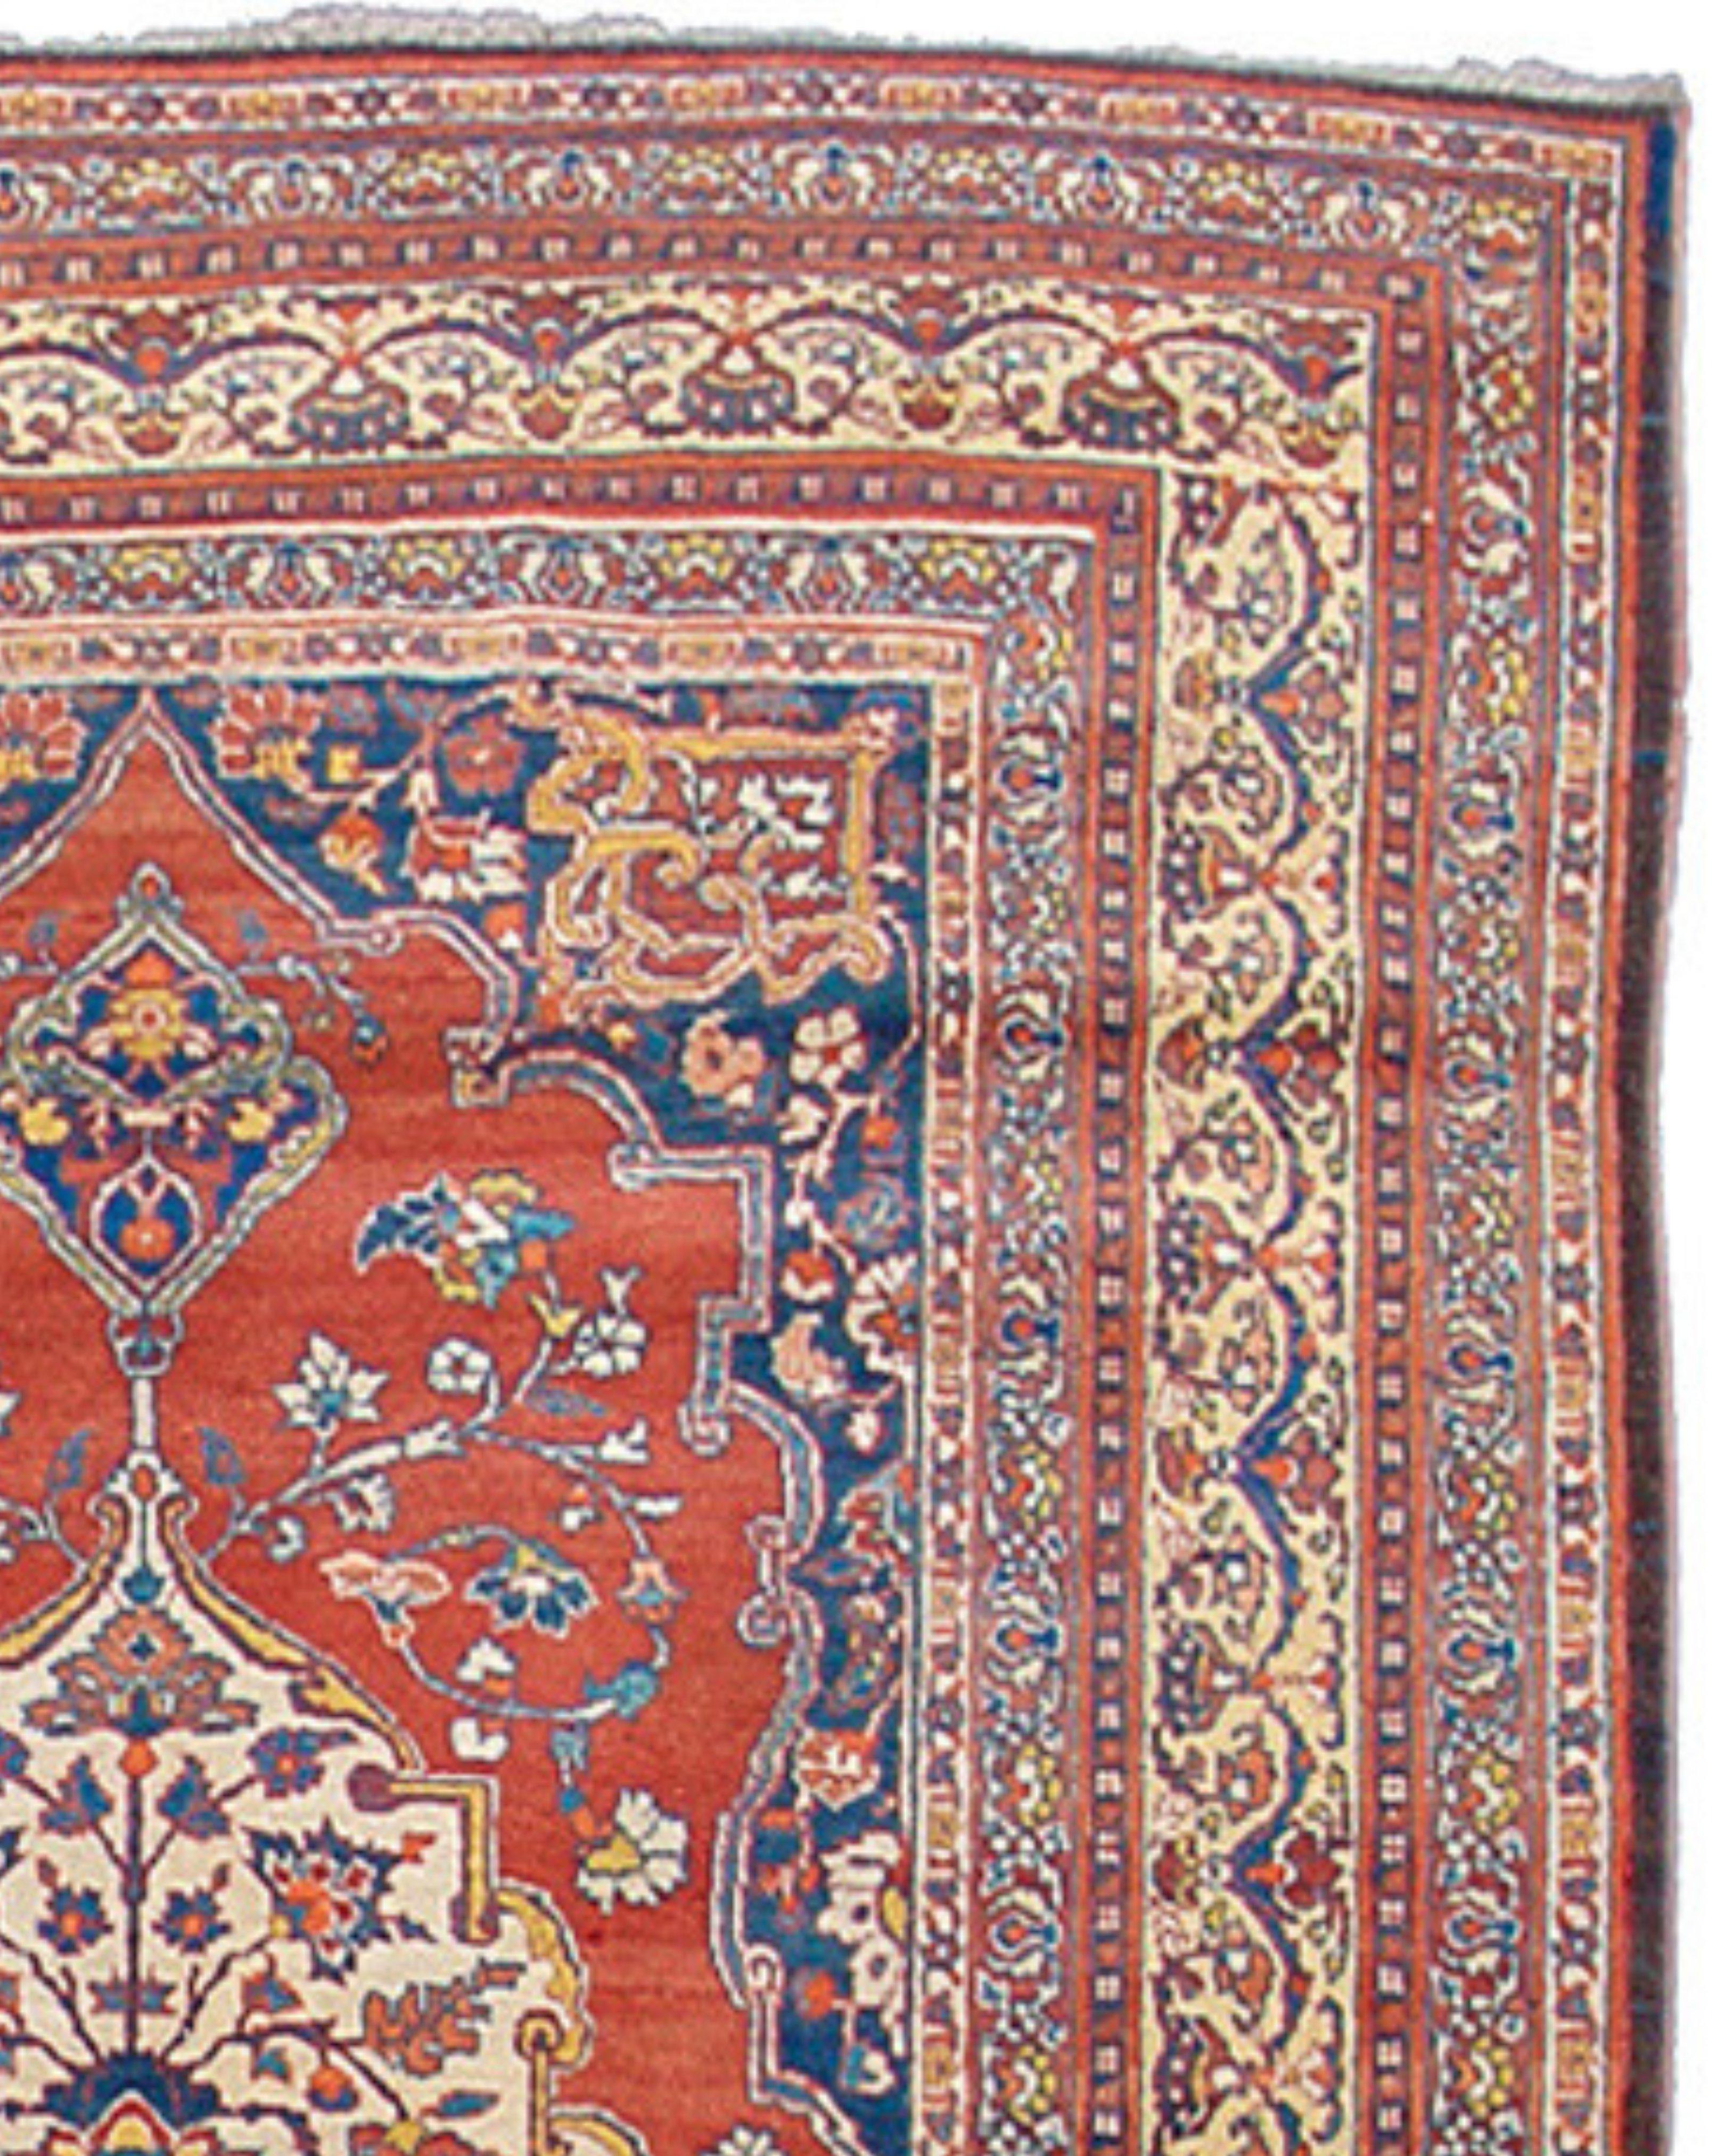 Antique Persian Tabriz Rug, 19th Century

Excellent condition.

Additional information:
Dimensions: 4'5